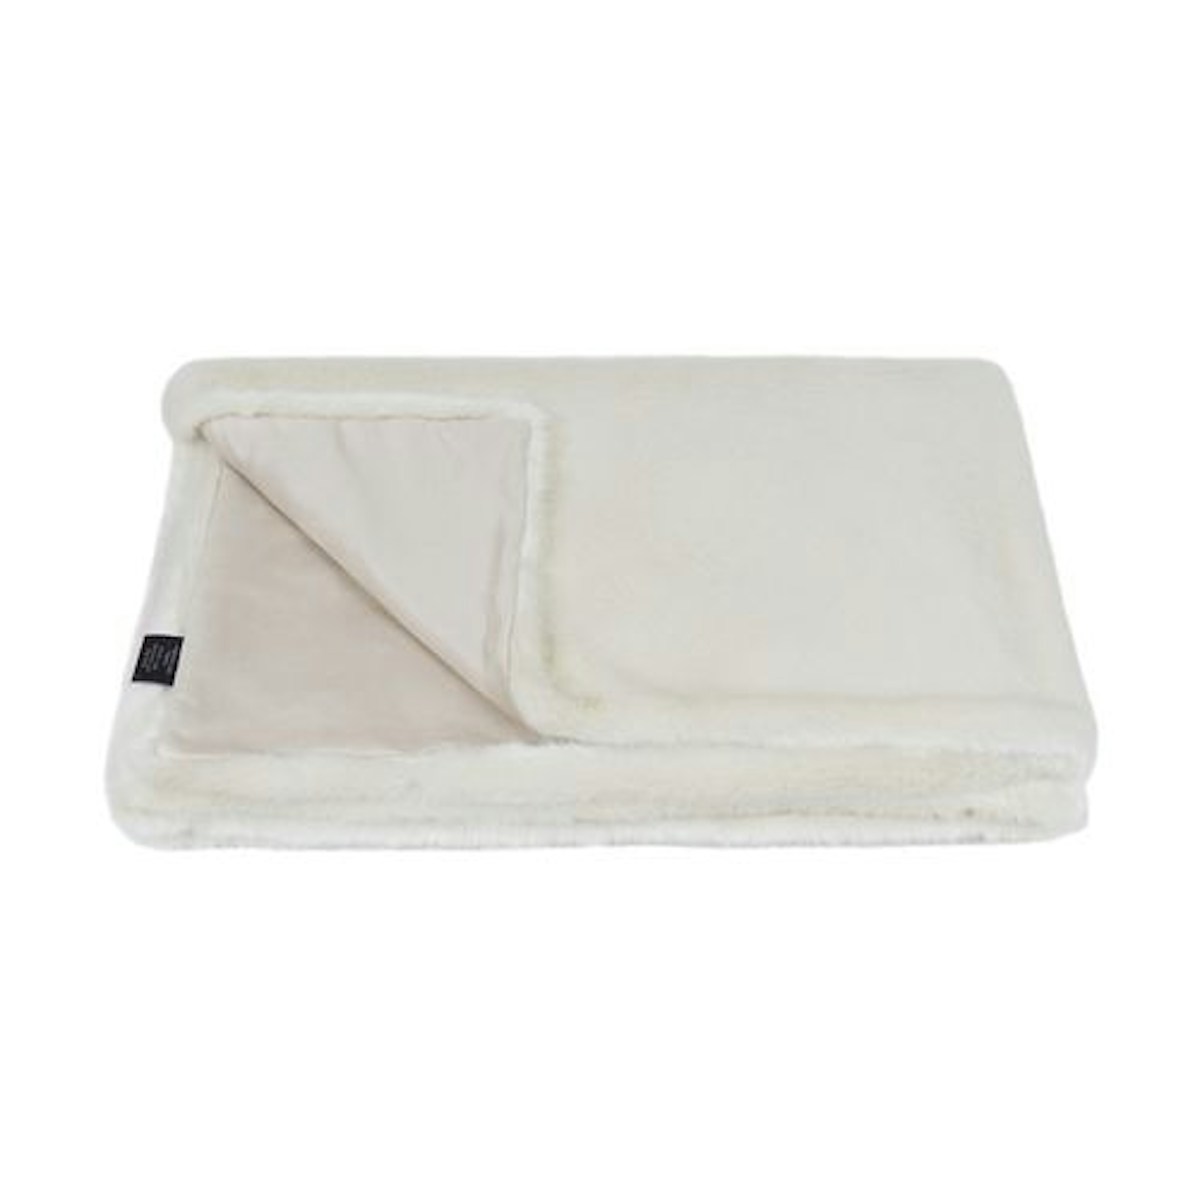 White Ermine Throw - 9 Best Luxury Throws & Blankets to Buy for your Home - Style Guide - LuxDeco.com